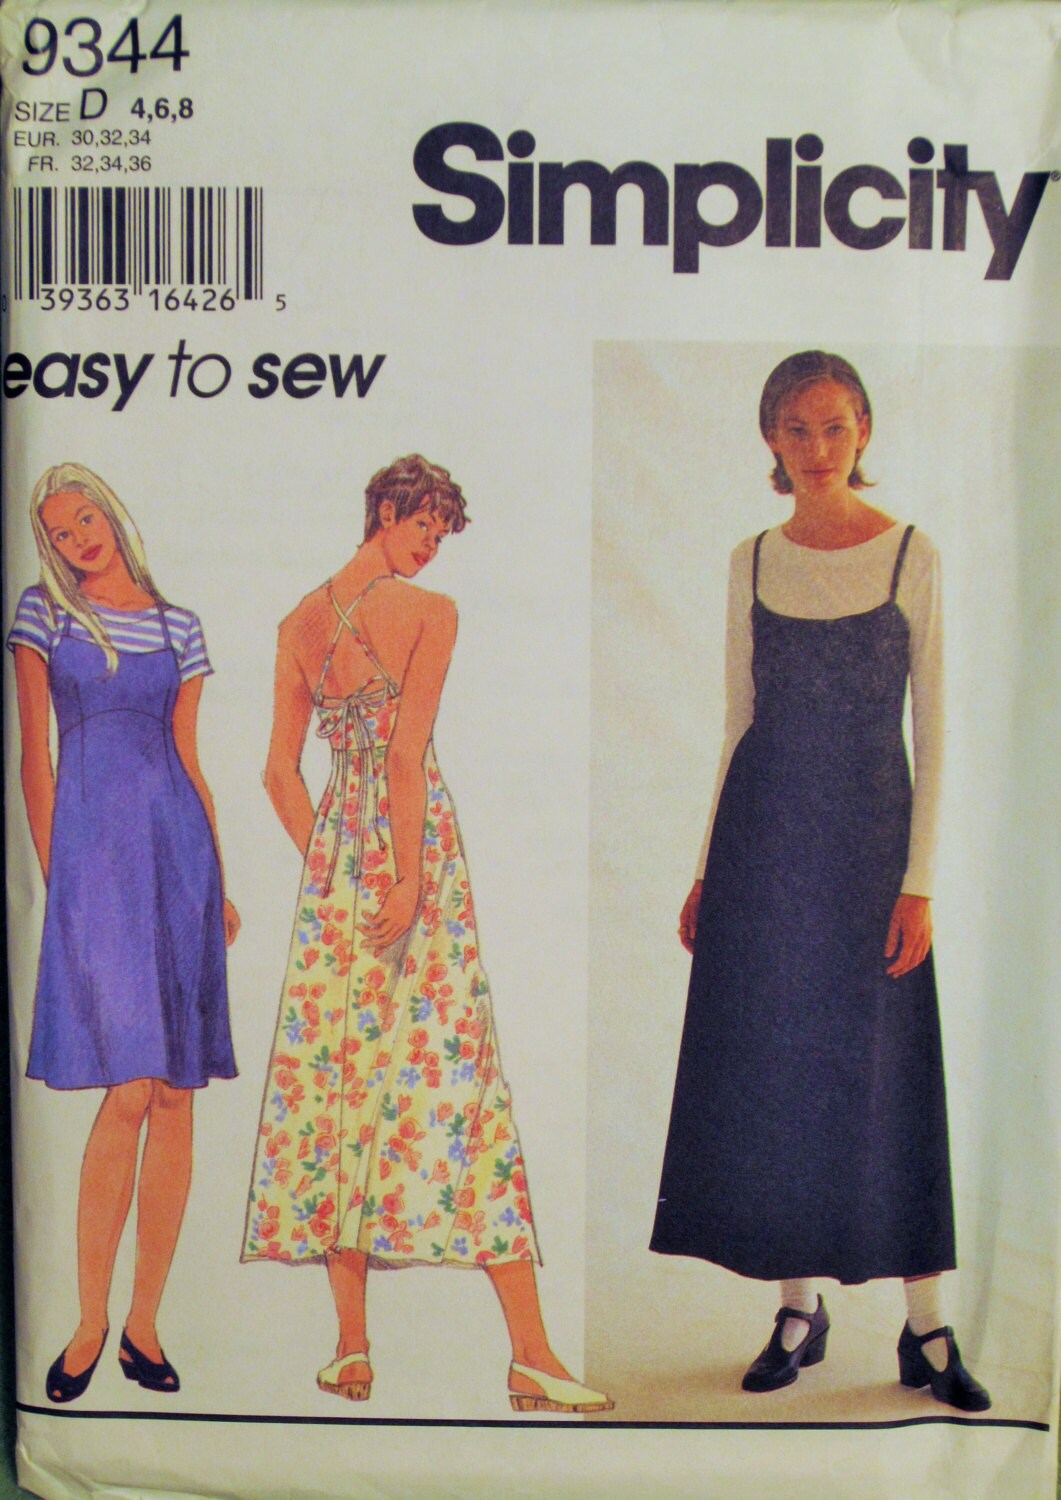 Women's Dress & Top Easy to Sew Simplicity Pattern 9344 | Etsy